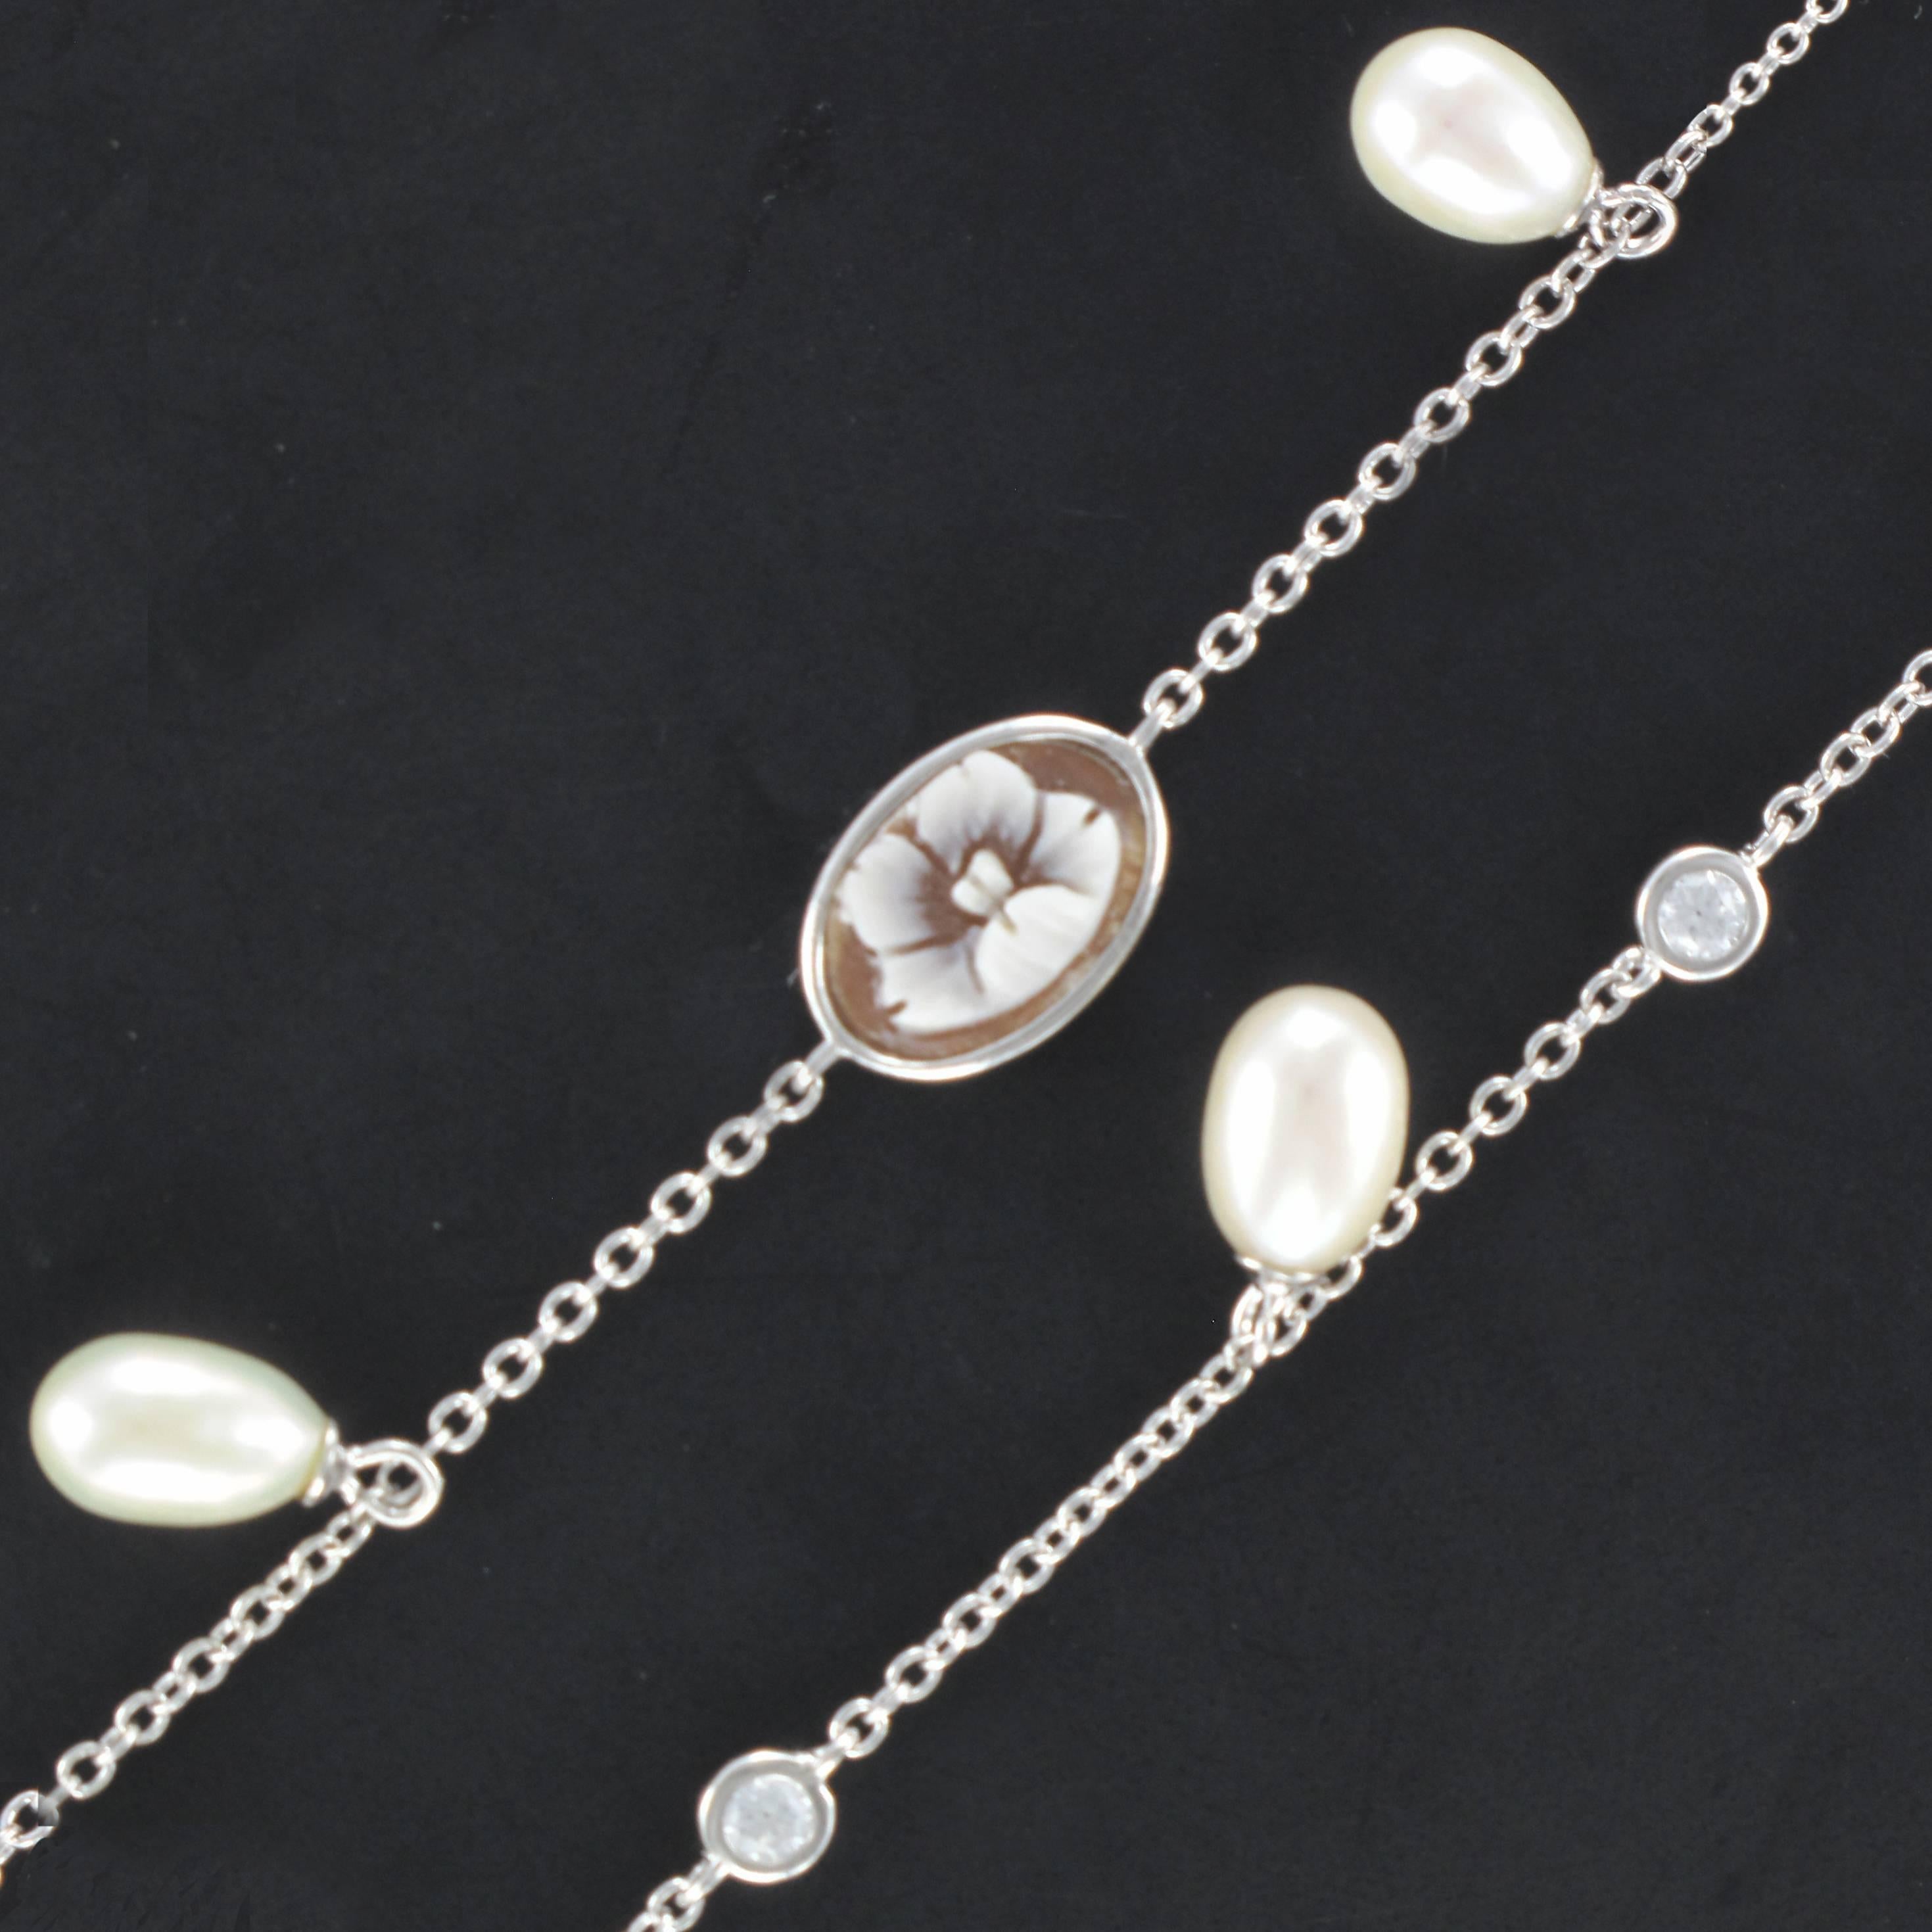 Women's Italian White Vermeil Cultured Pearls Crystals Cameo Long Necklace